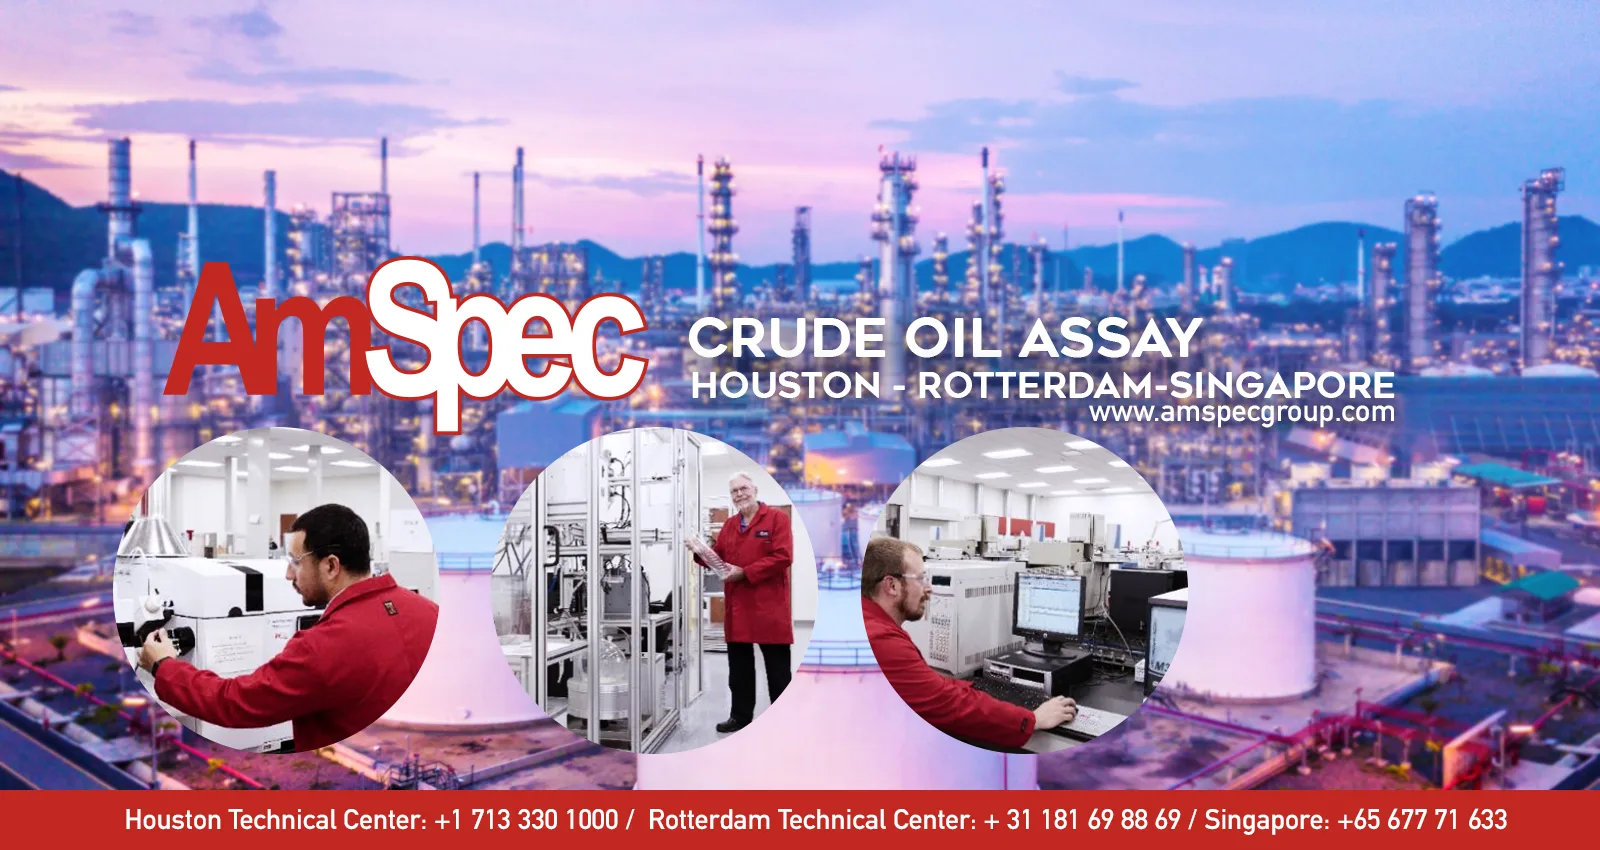 Crude oil assay flyer with capable location list – Houston, Rotterdam, and Singapore.